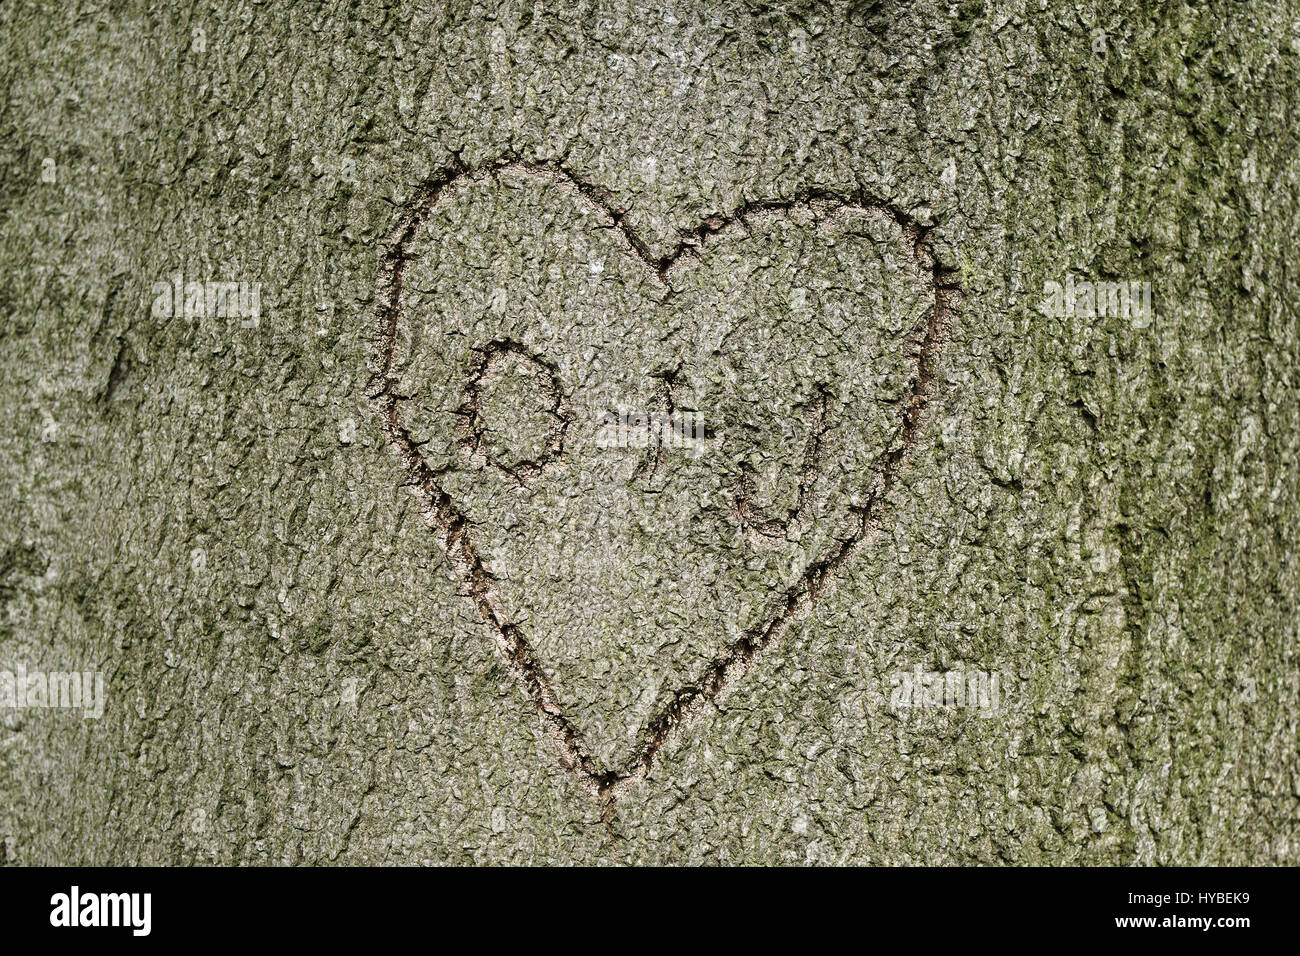 heart shape with initials carved into tree Stock Photo